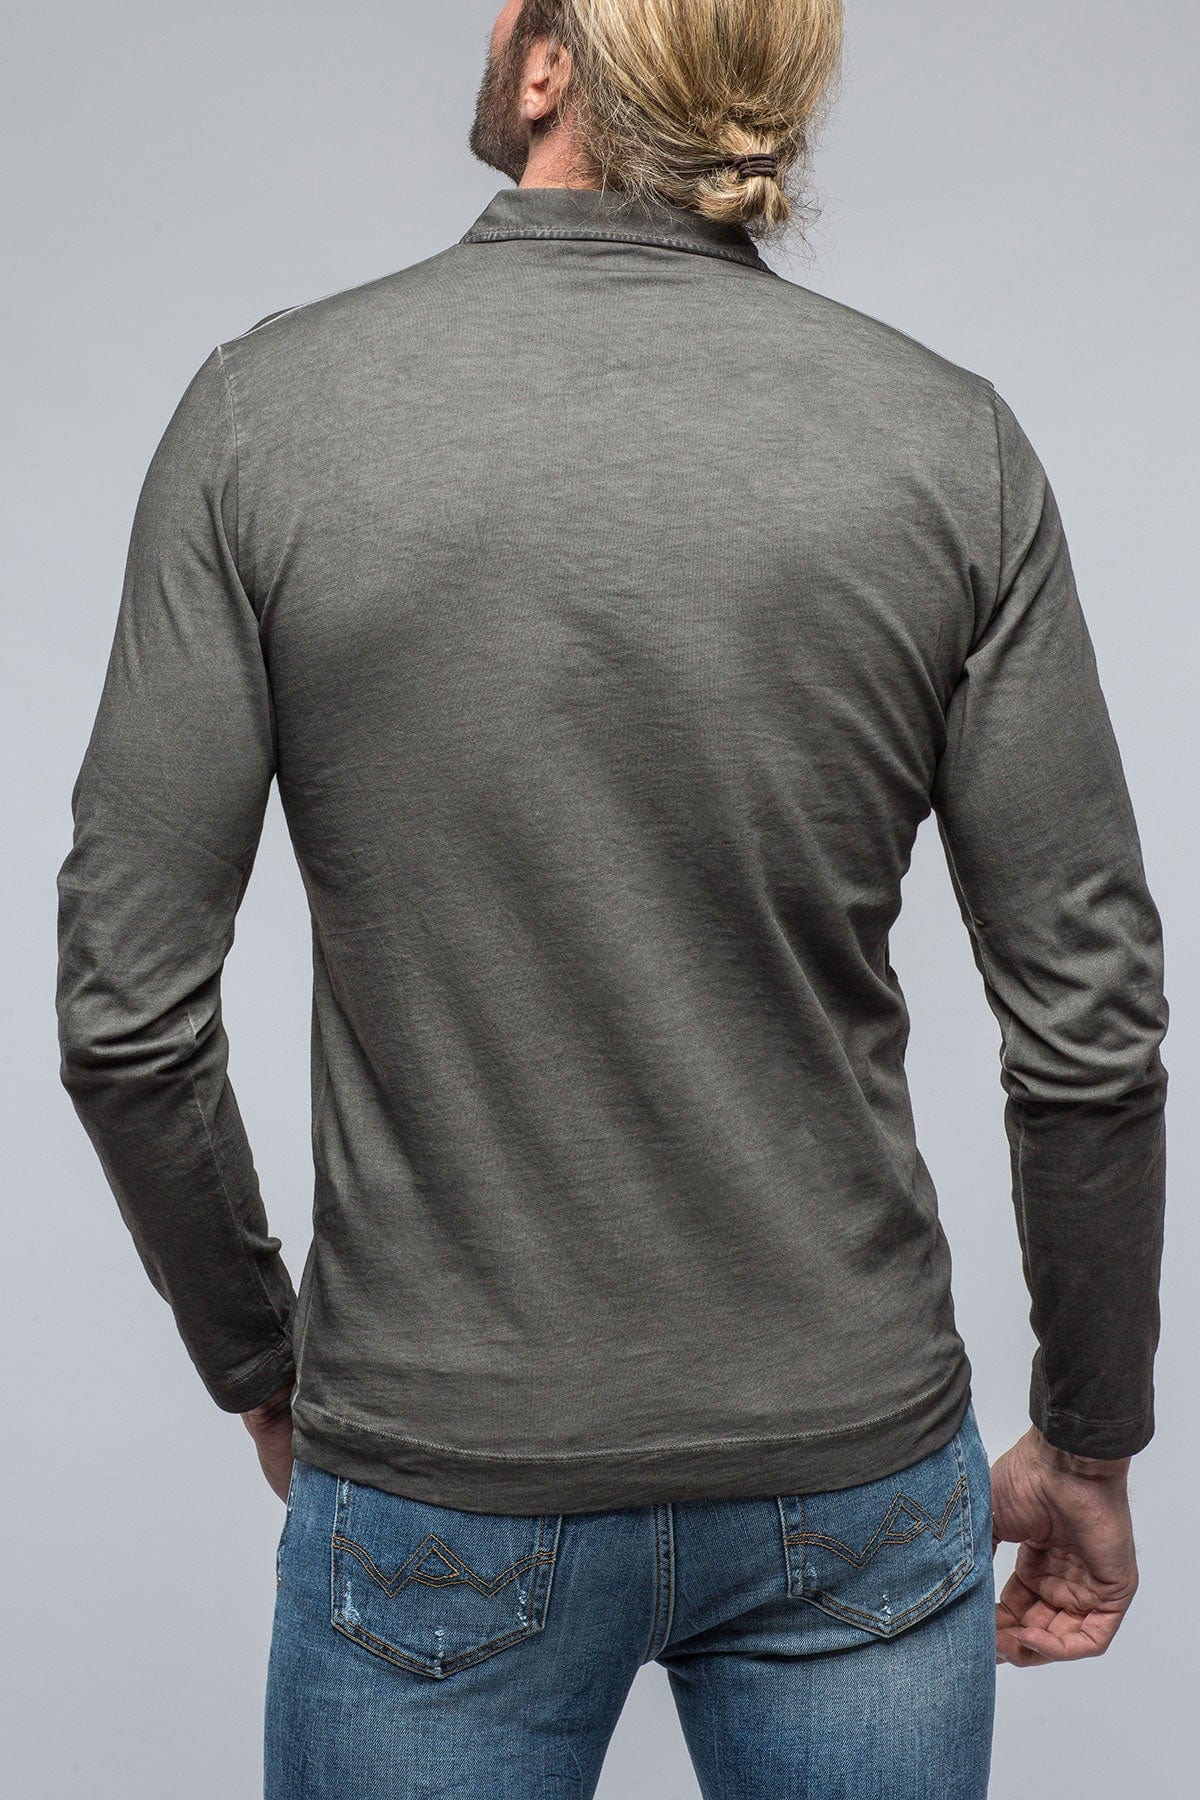 Torrance Long Sleeve Polo in Charcoal - AXEL'S